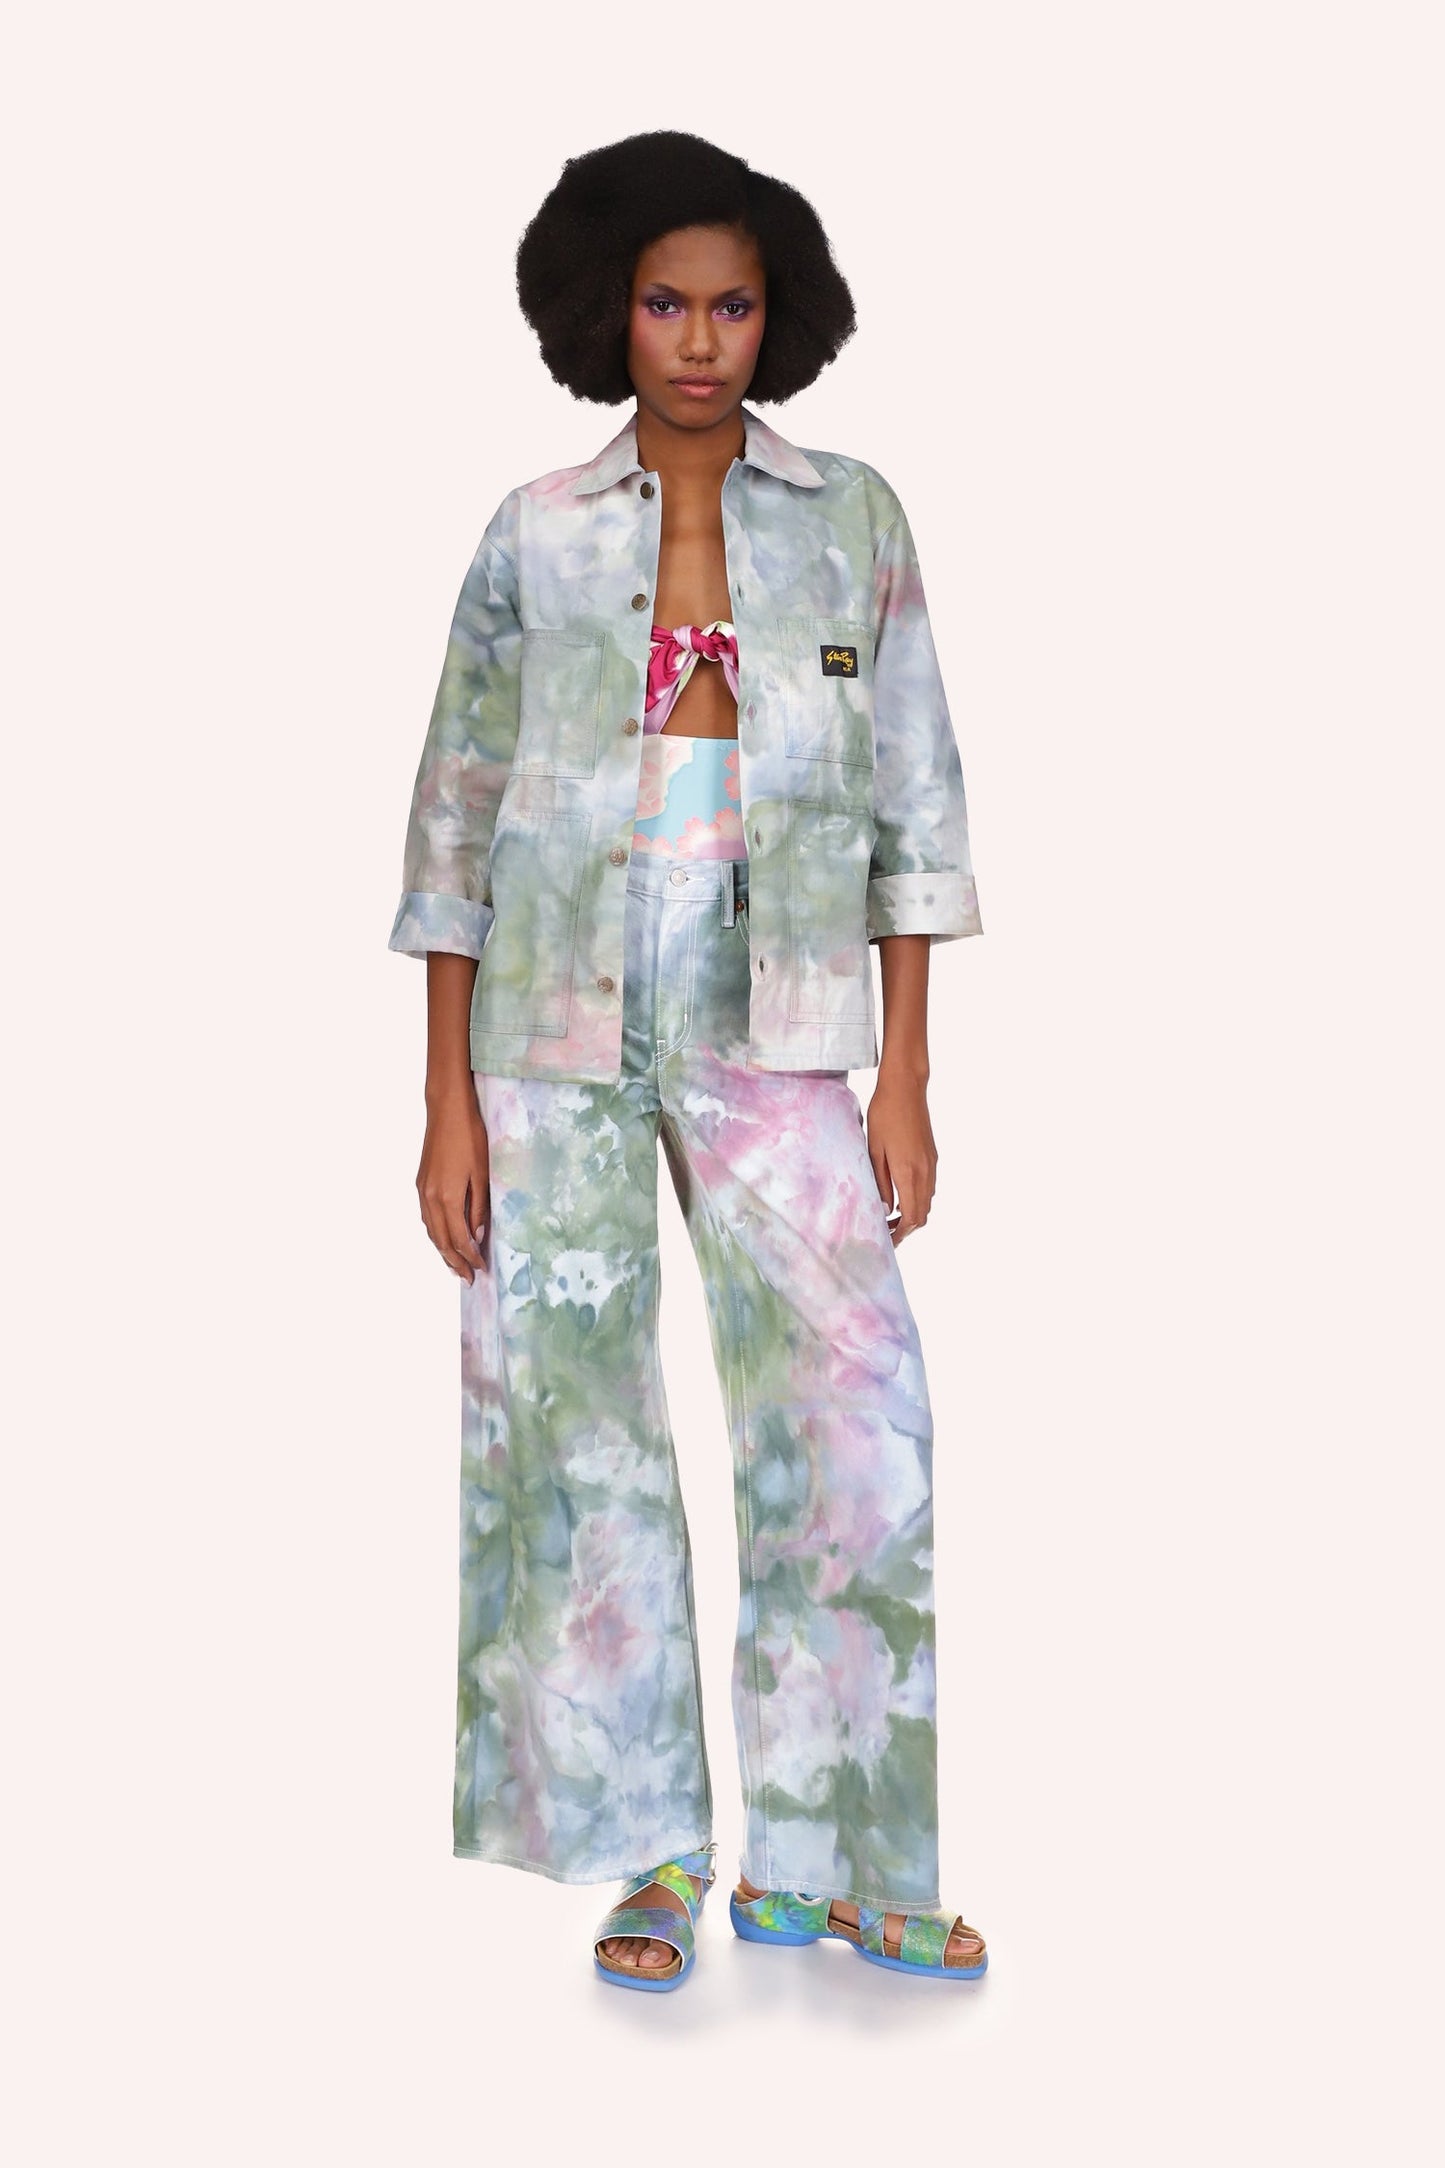 Ocean Tie Dye Jacket, mid-arm sleeves with a fold-over, waist long, High collar in the back